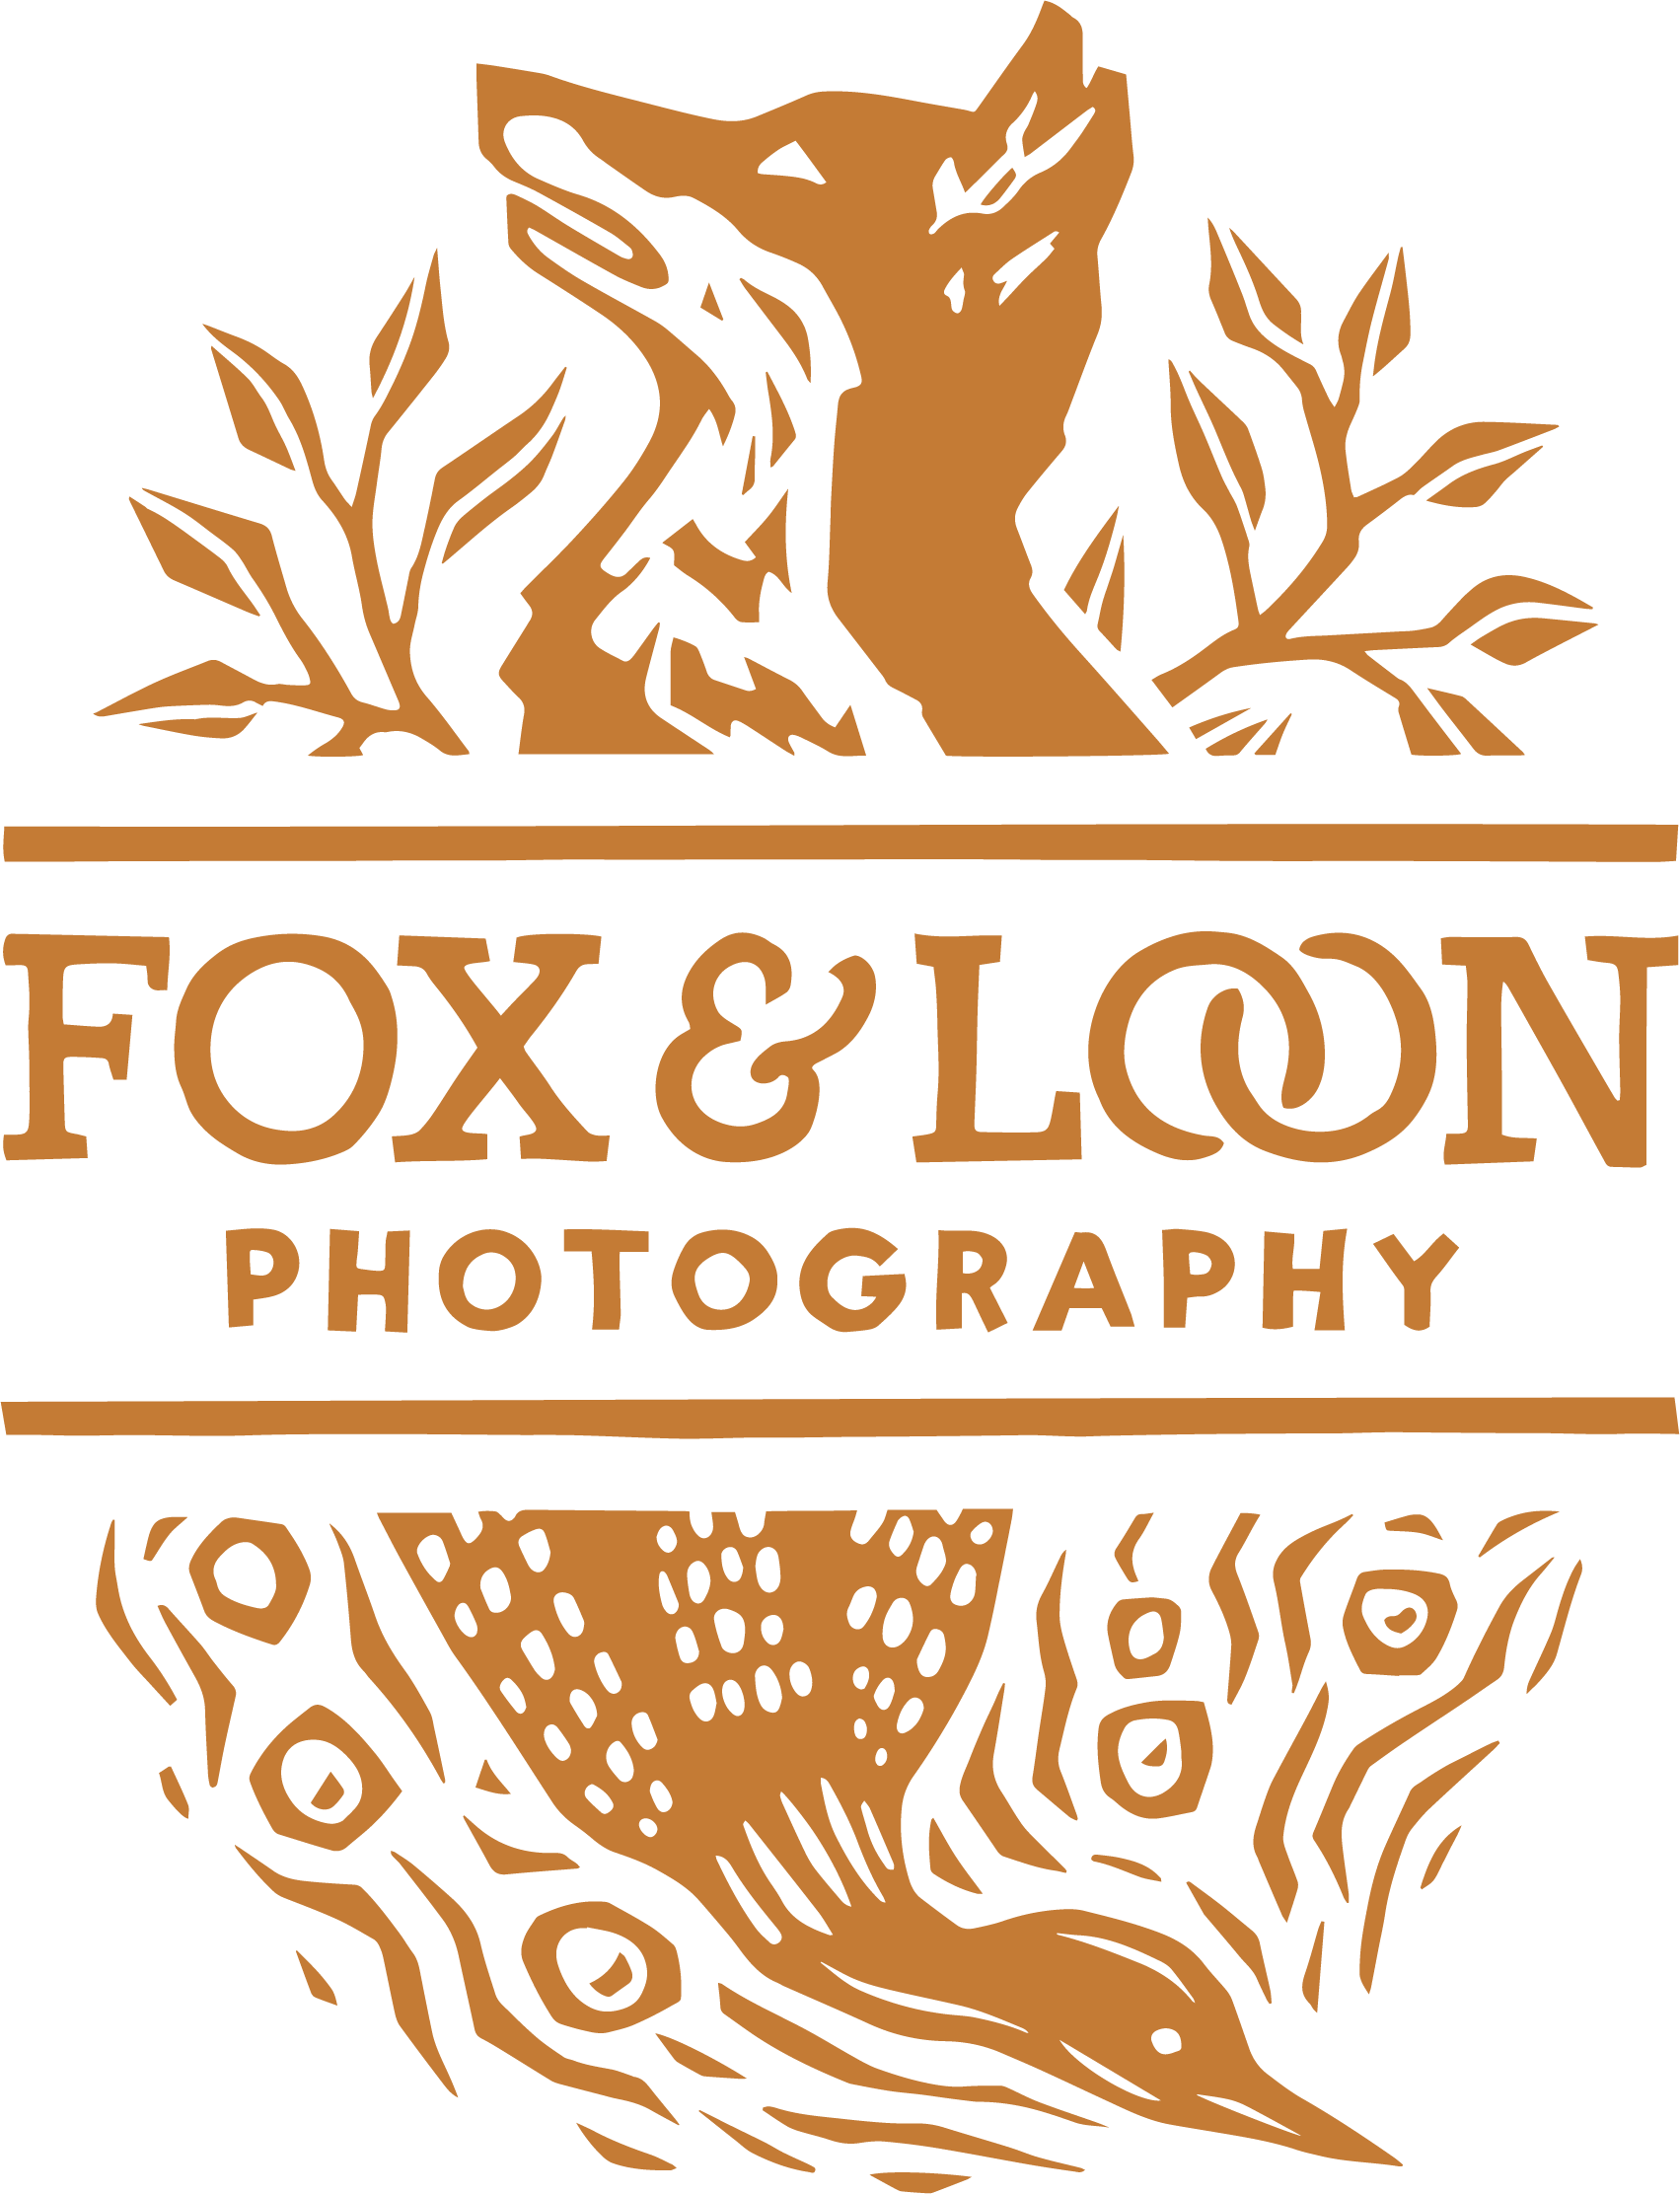 An orange block print with a fox facing upward and loon diving into the water with the words Fox and Loon Photography in the middle